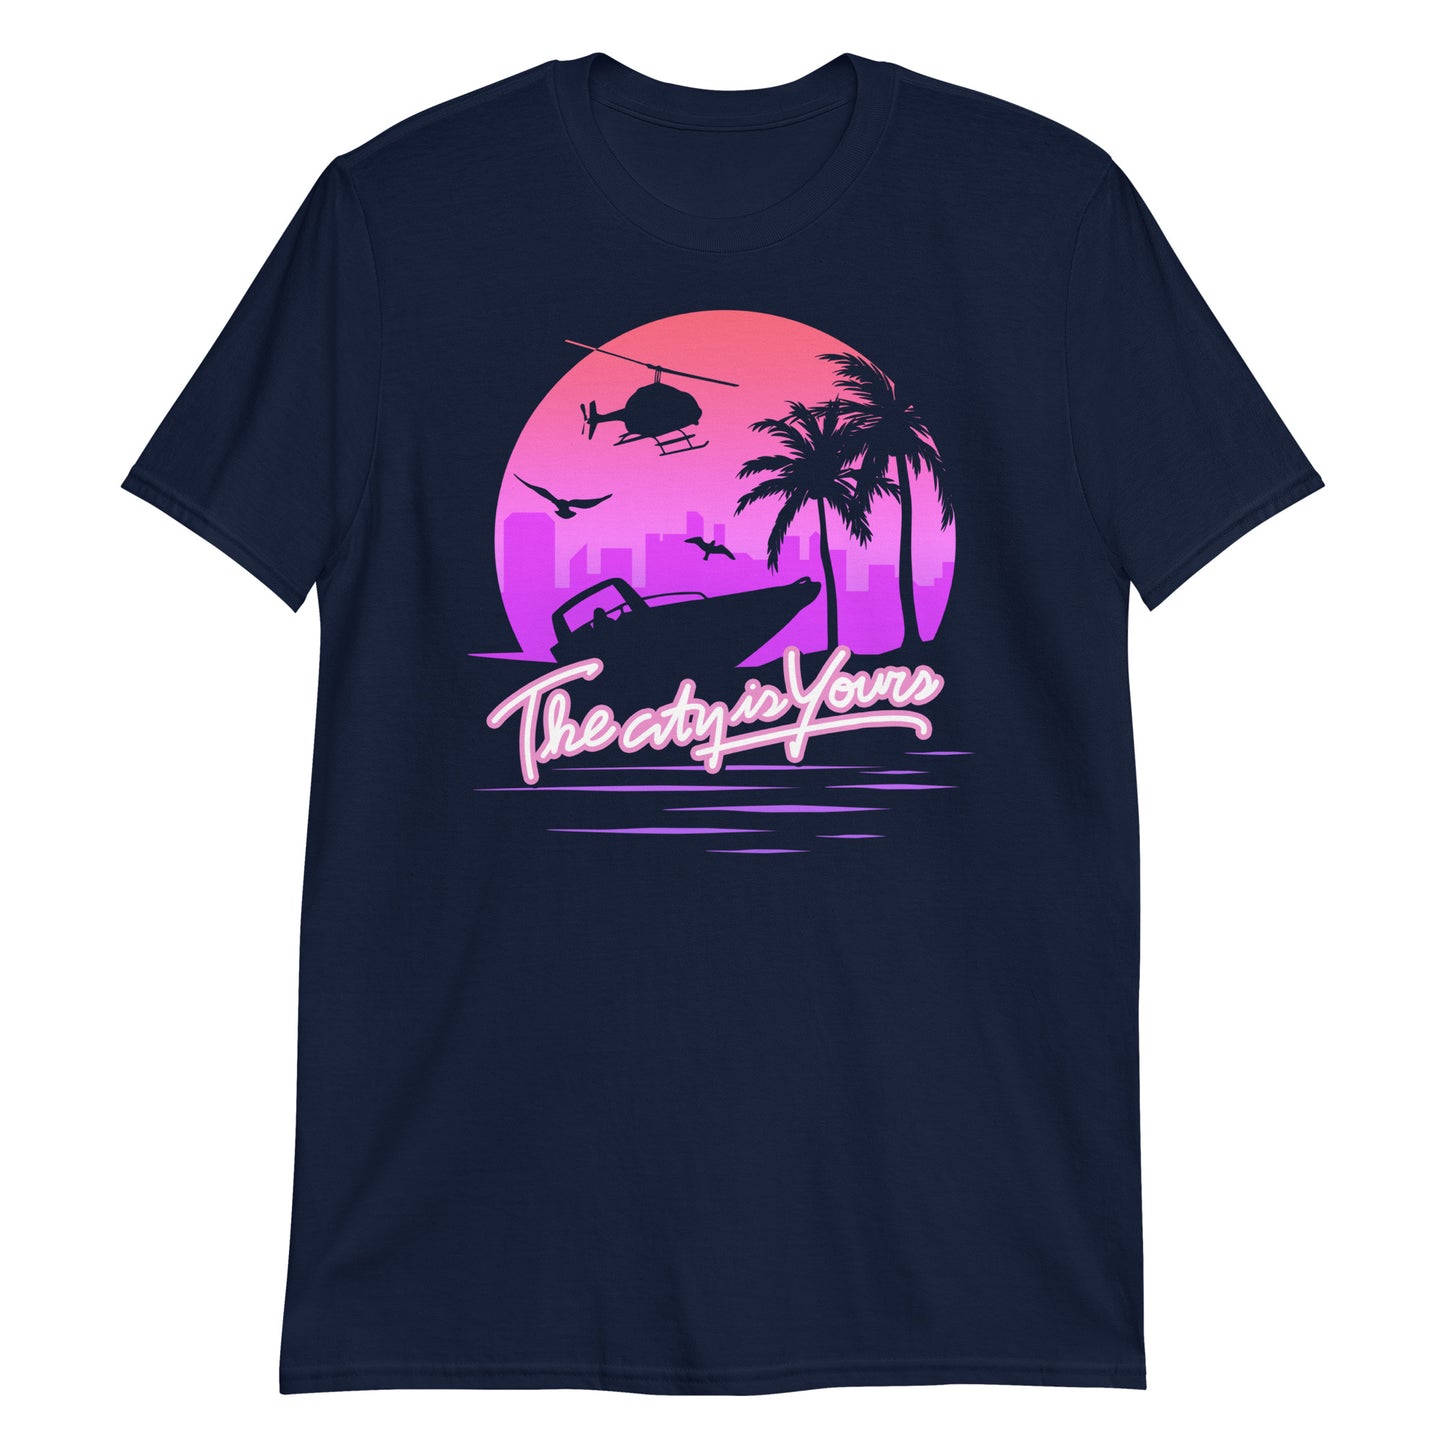 The City Is Yours t-shirt